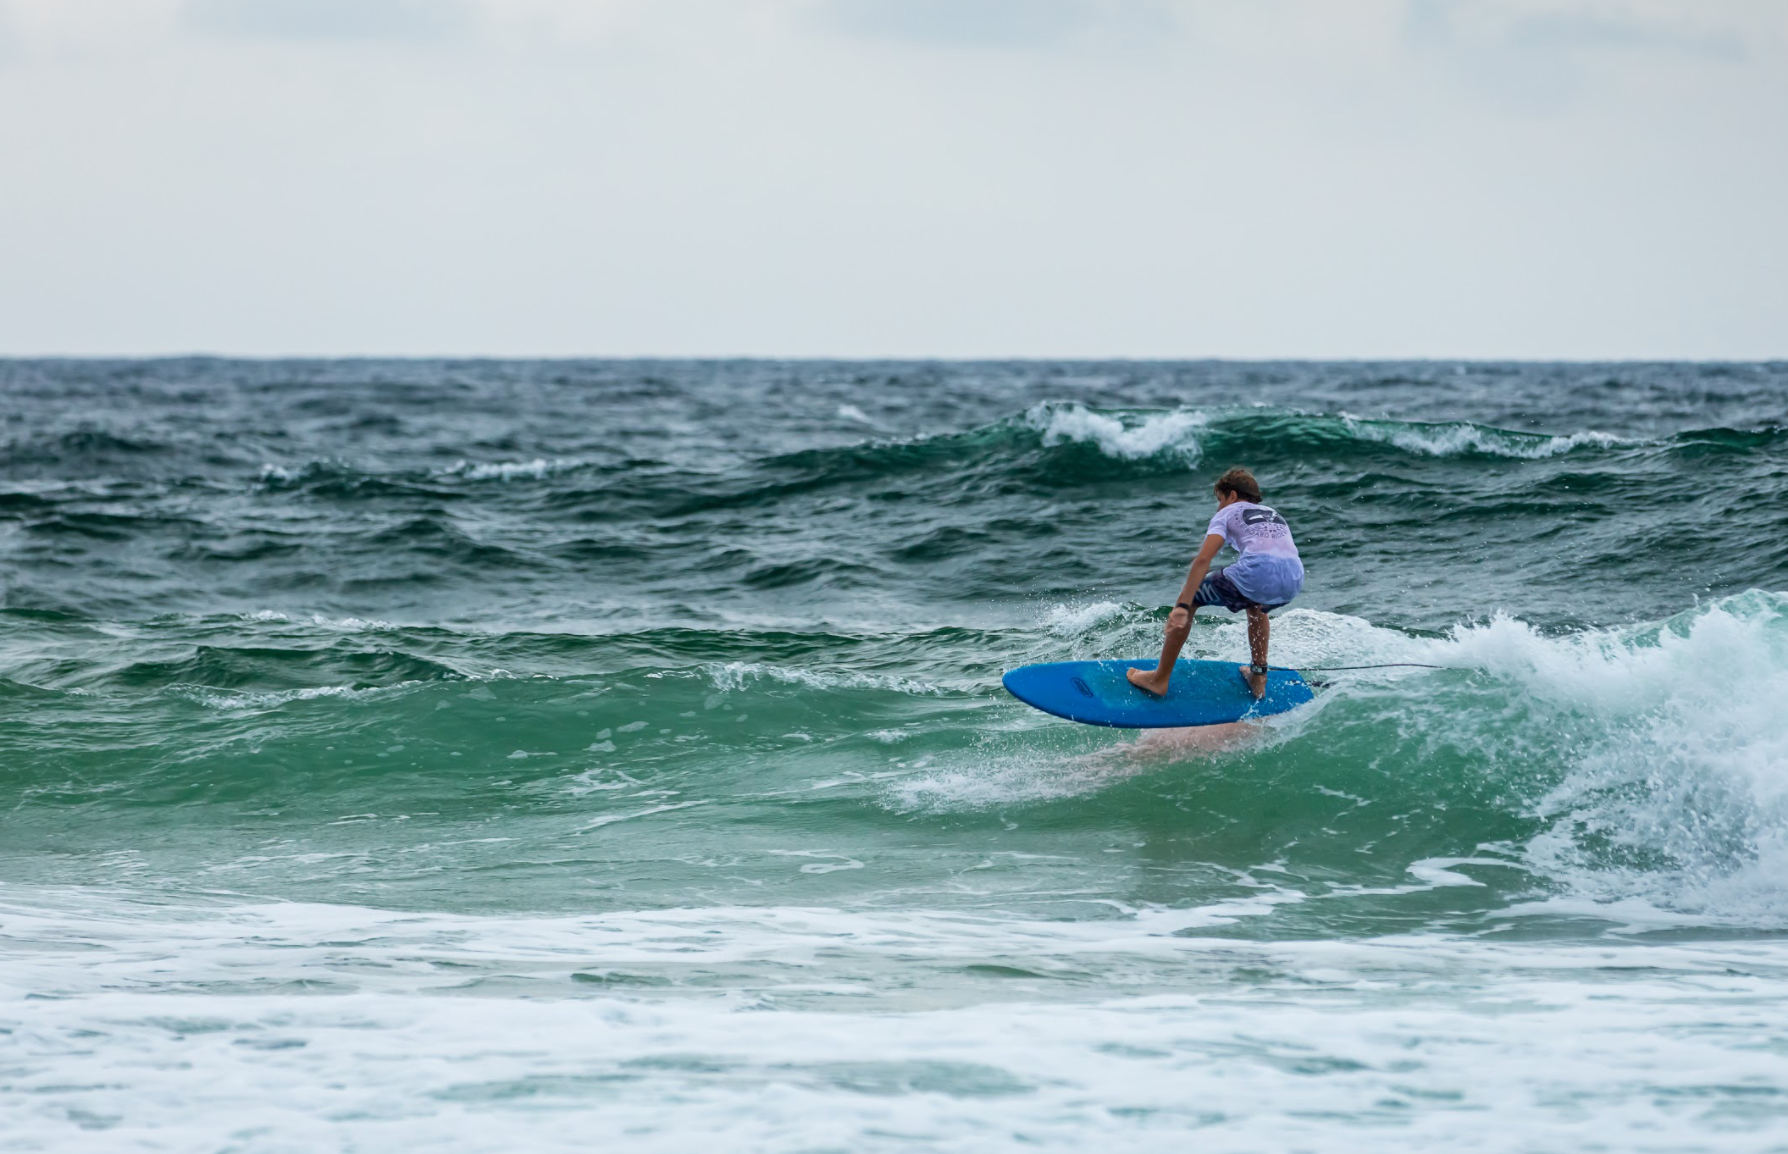 Whatever your surfing talent, there is a wave for you 